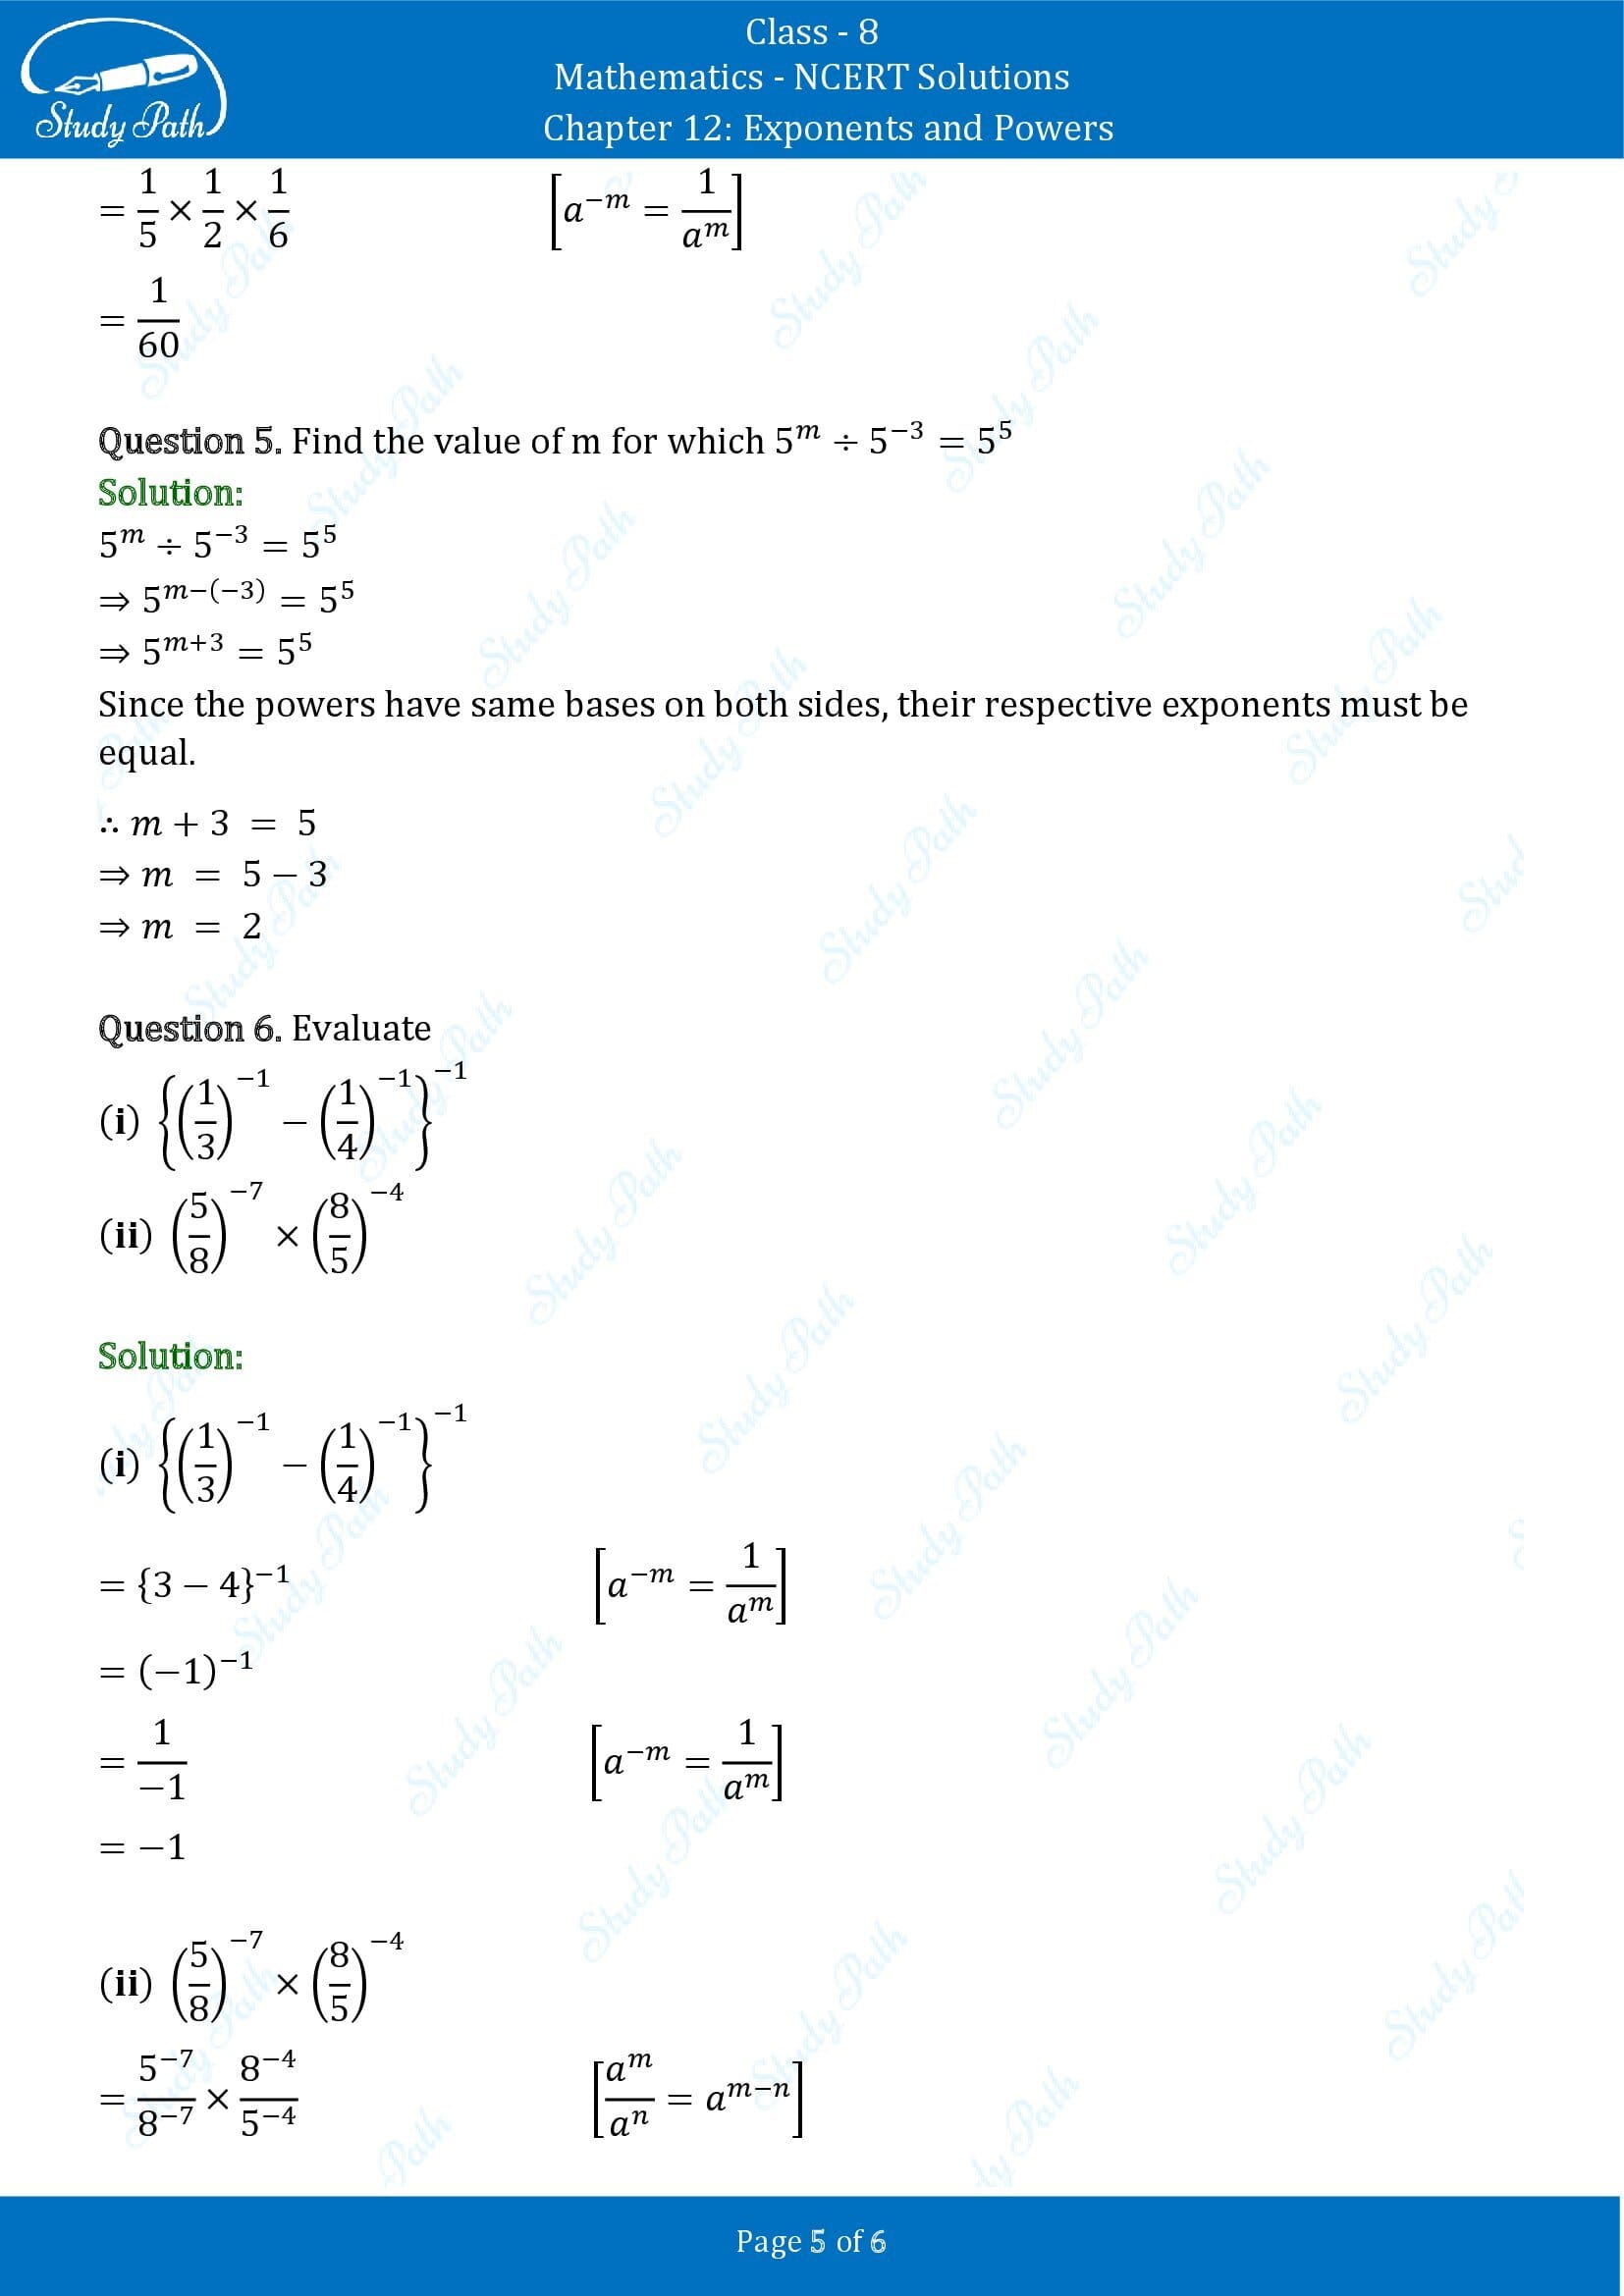 NCERT Solutions for Class 8 Maths Chapter 12 Exponents and Powers Exercise 12.1 00005